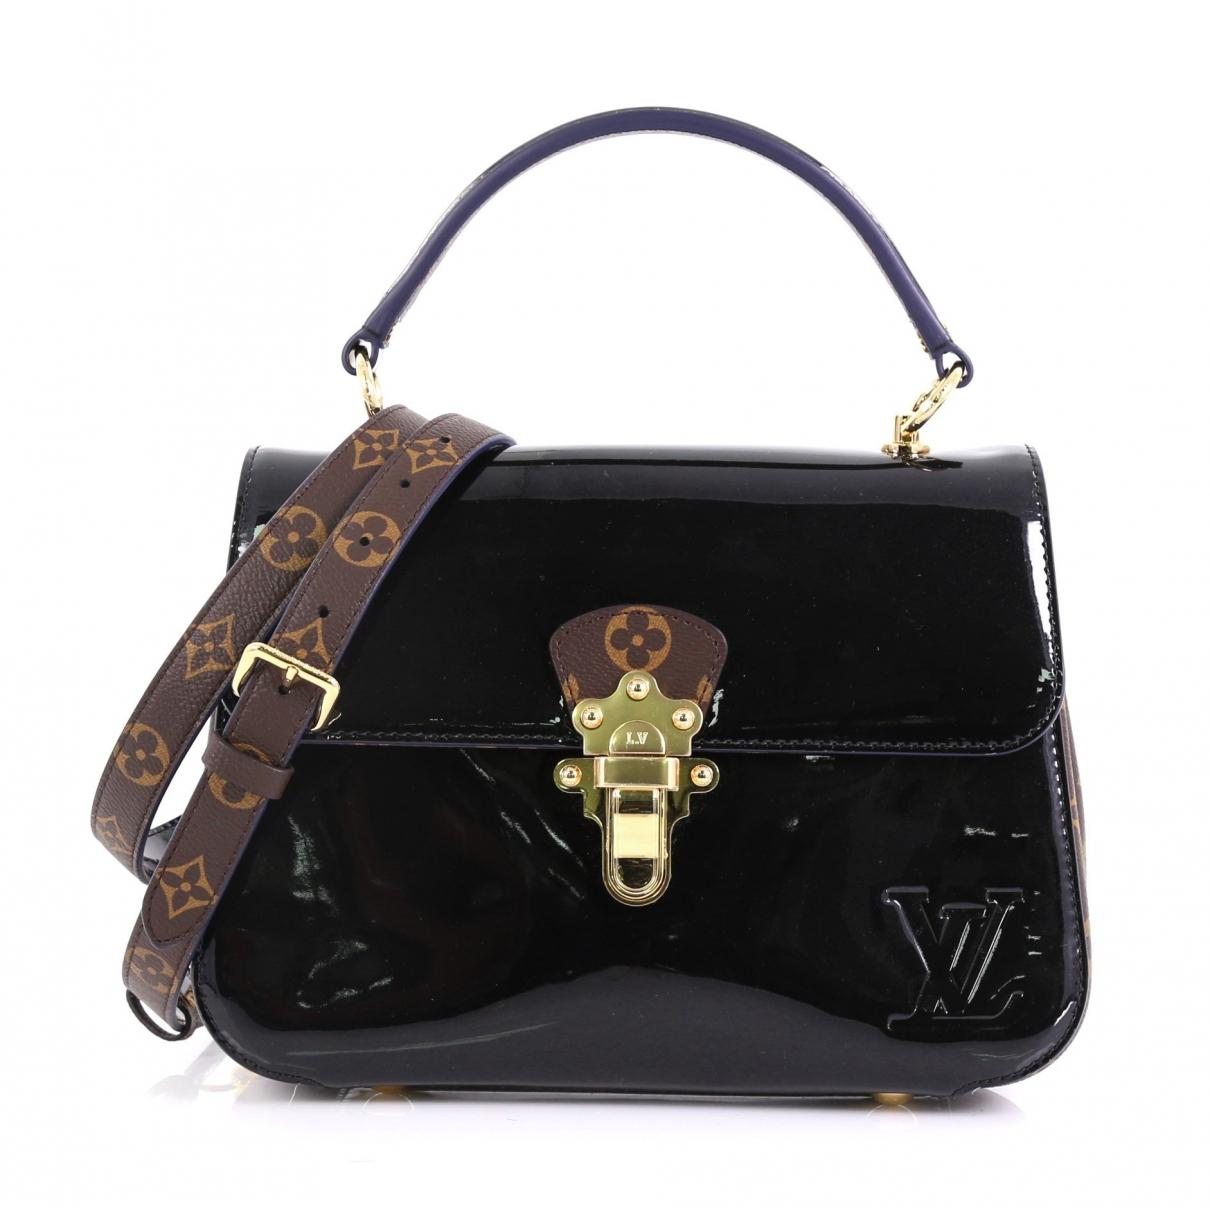 Lyst - Louis Vuitton Pre-owned Cherrywood Black Patent Leather Handbags in Black